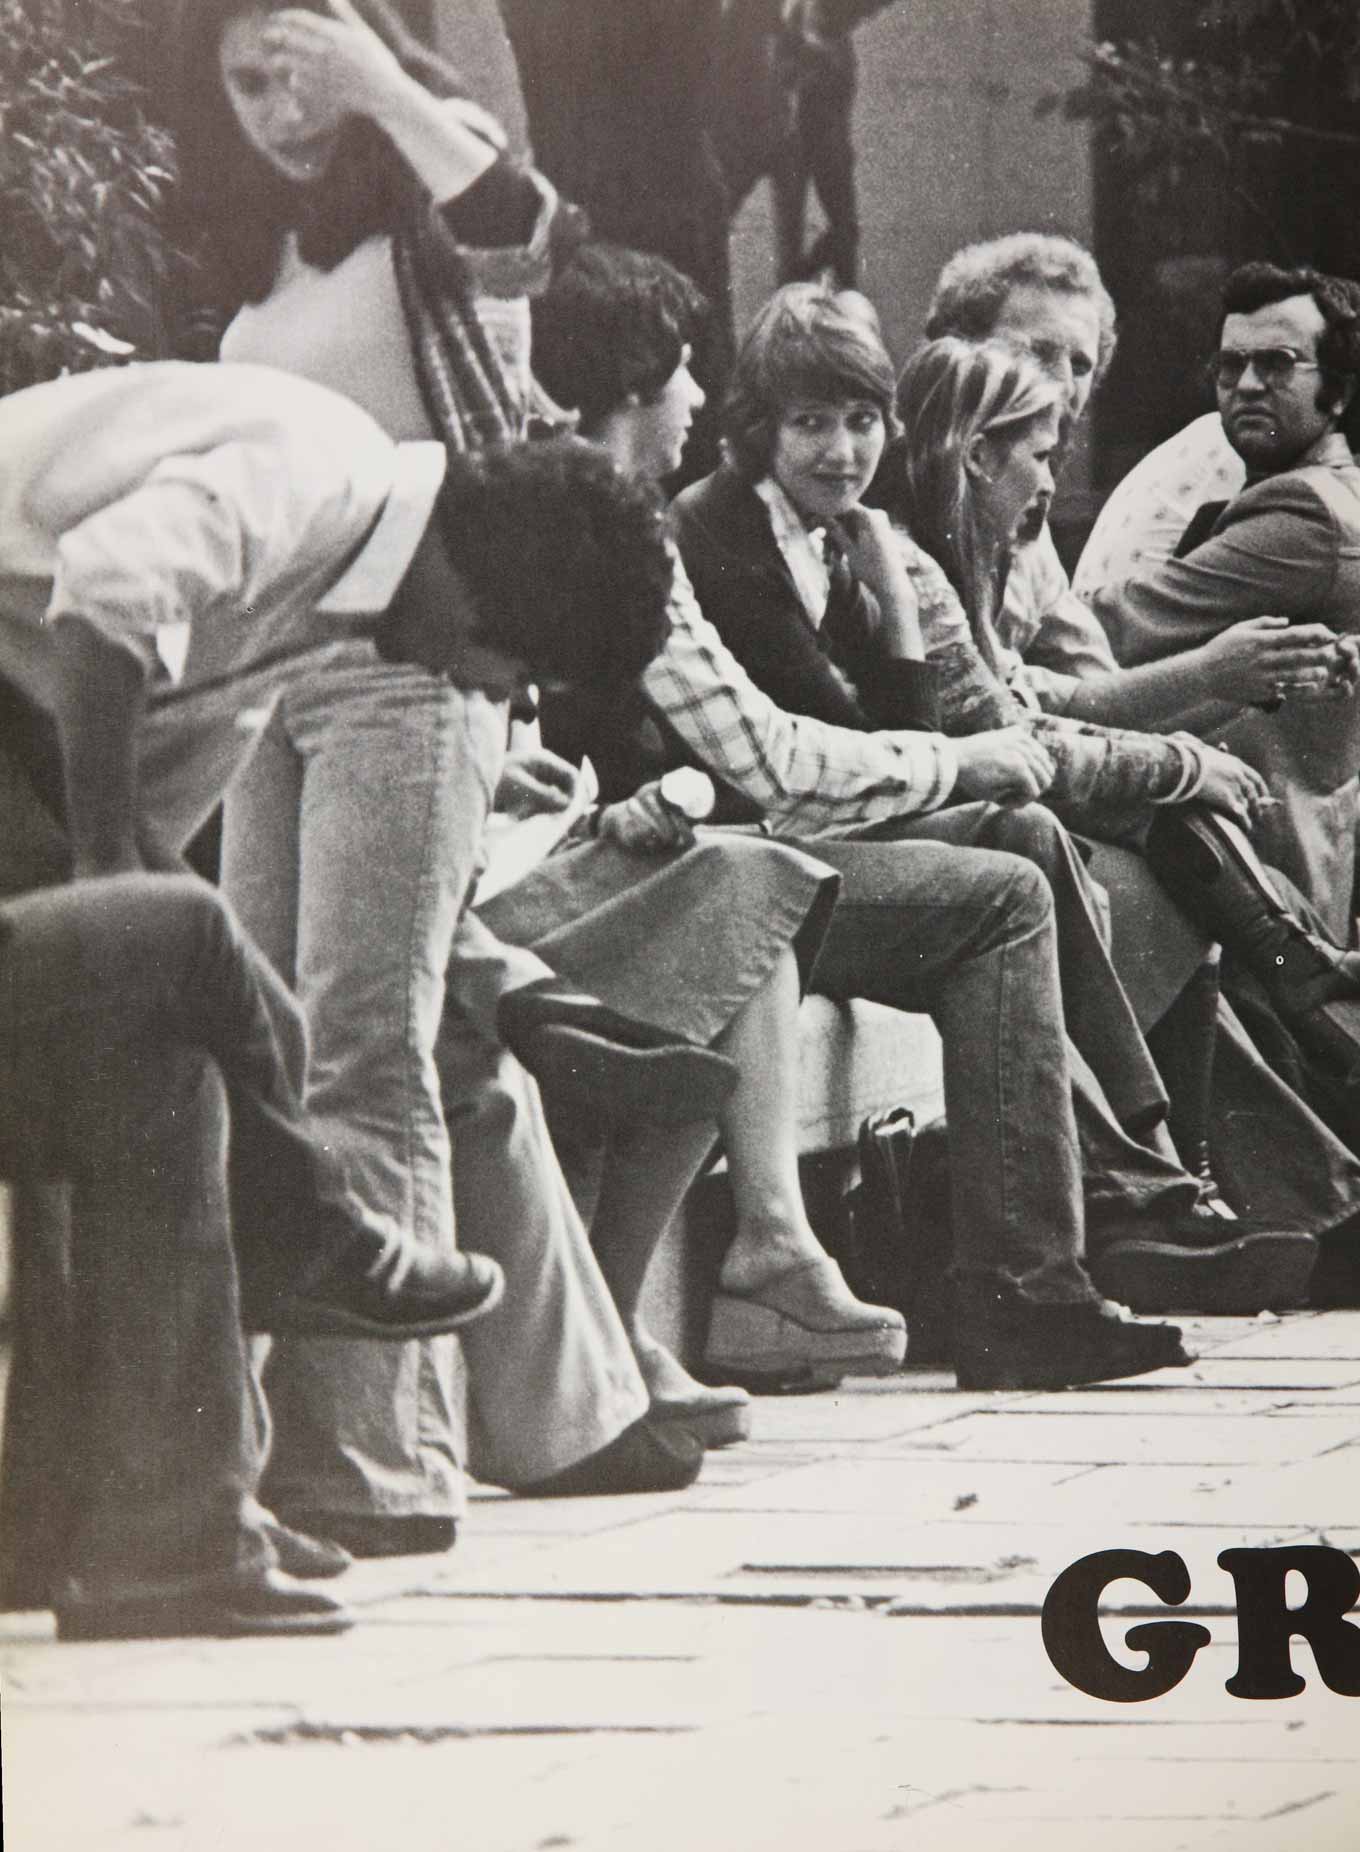 McGill Yearbook: 1976